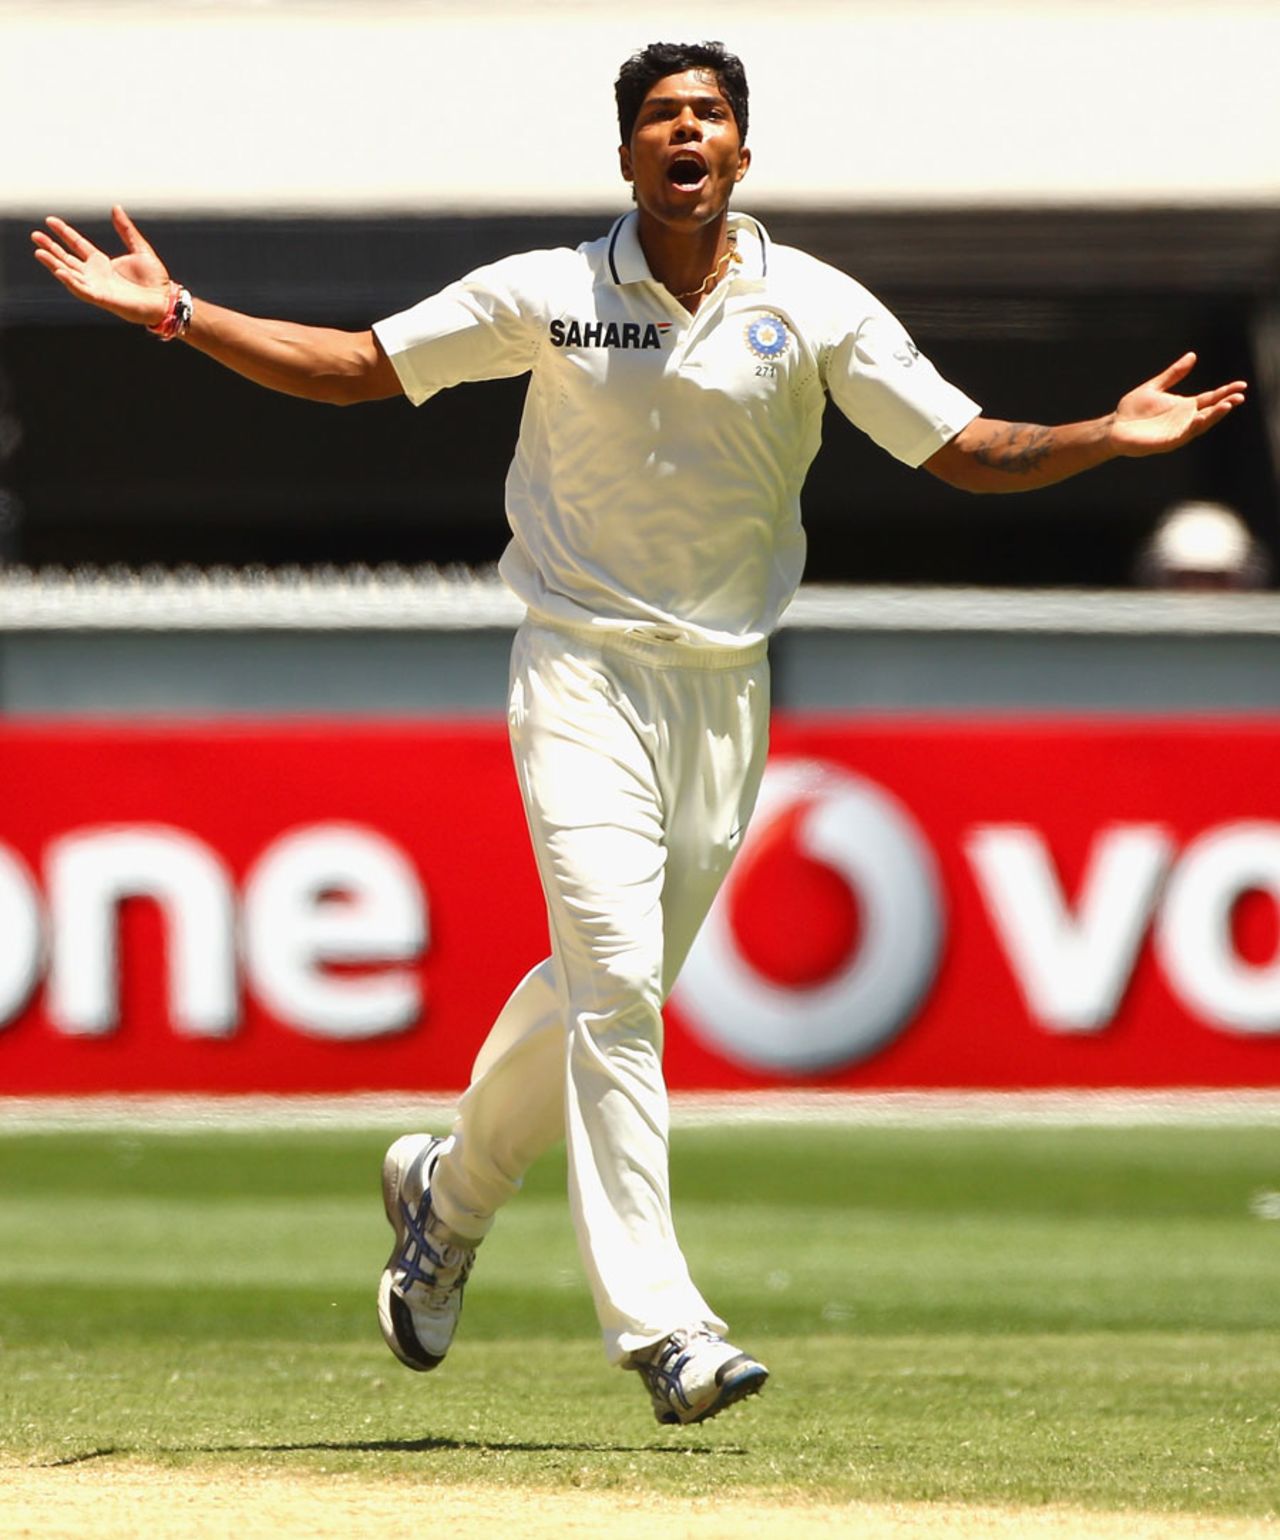 Umesh Yadav picked up early wickets once again, Australia v India, 1st Test, Melbourne, 3rd day, December 28, 2011